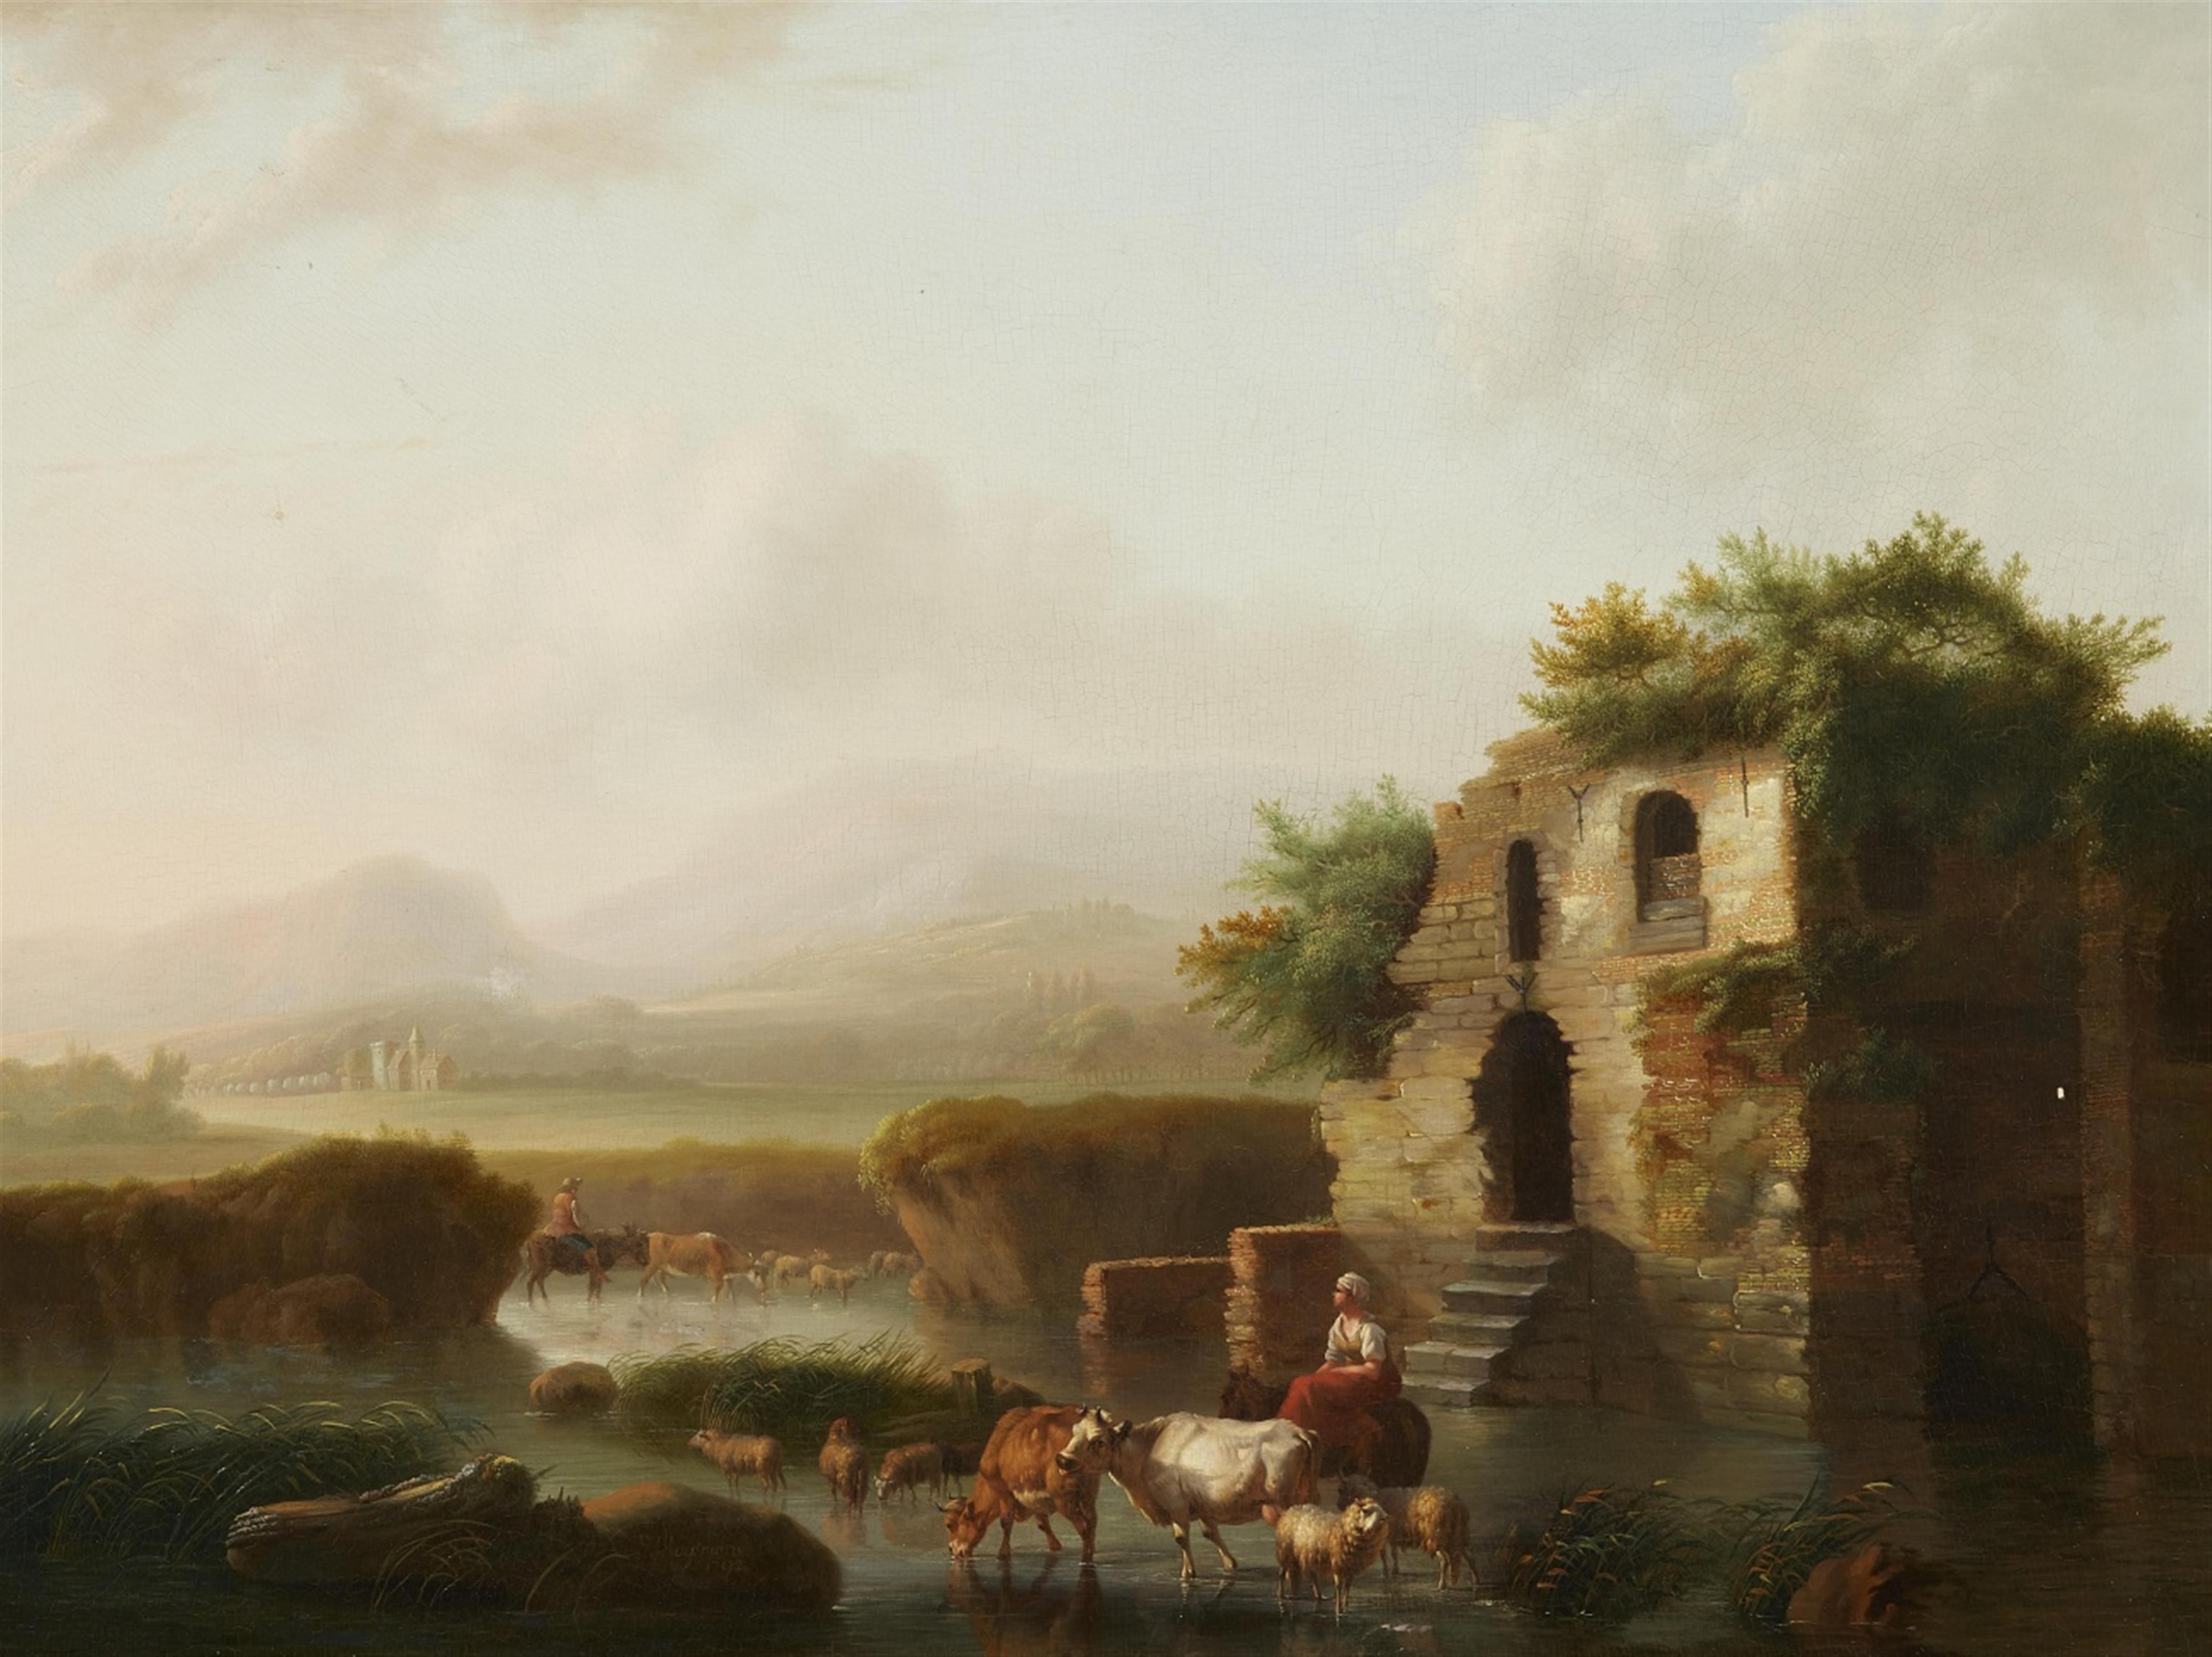 Huysmans - Landscape with Ruins and Cattle - image-1